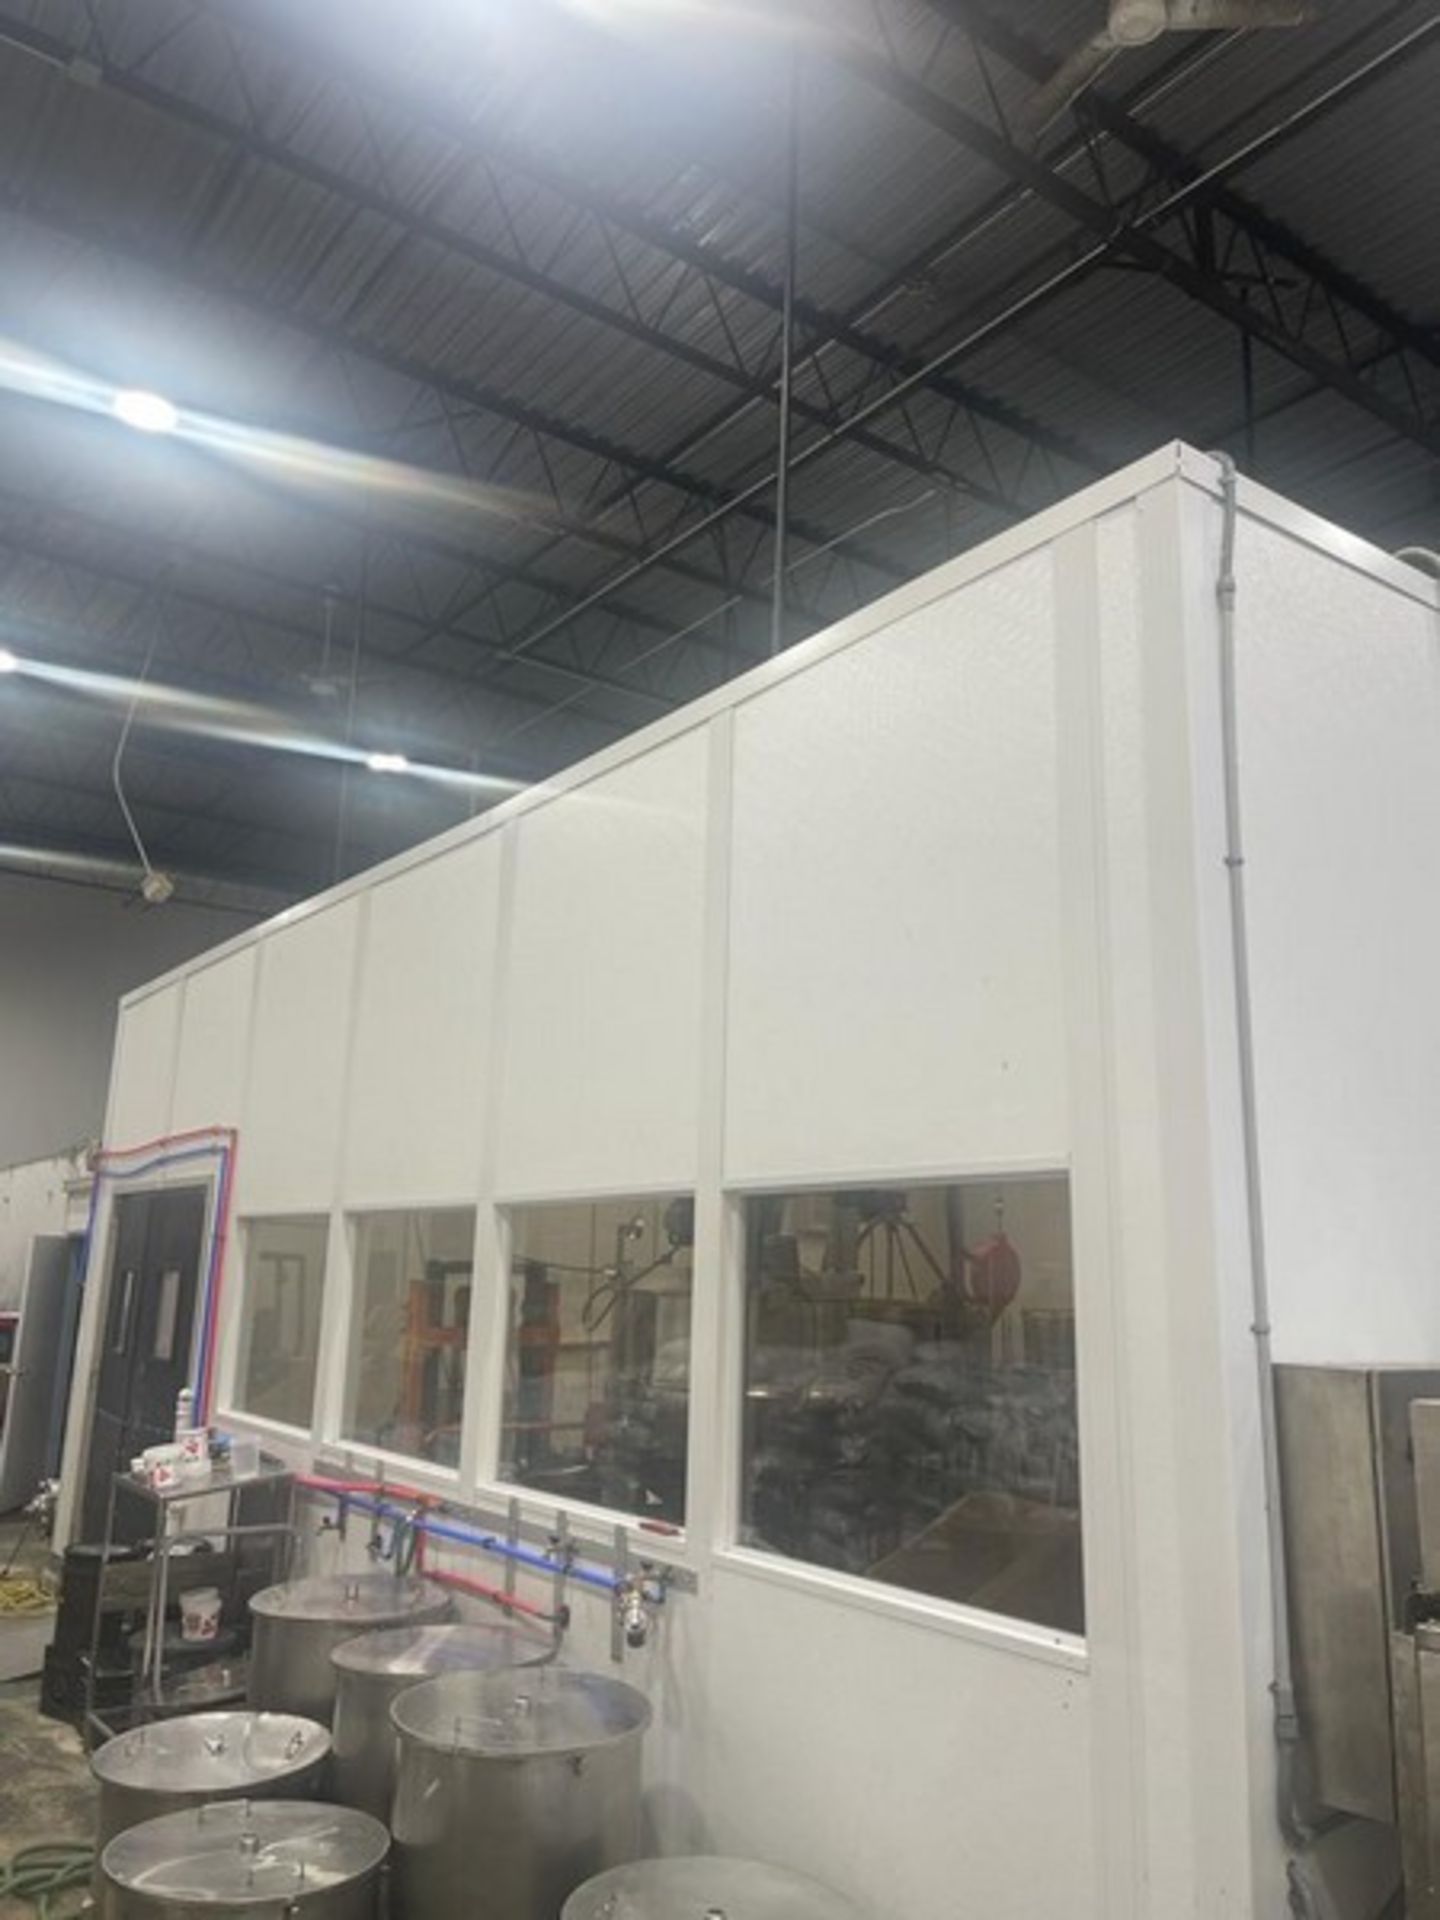 Panel-Built Office/Production Room with Impact Doors and HVAC, Drop Ceiling, 8' x 8' Rolling